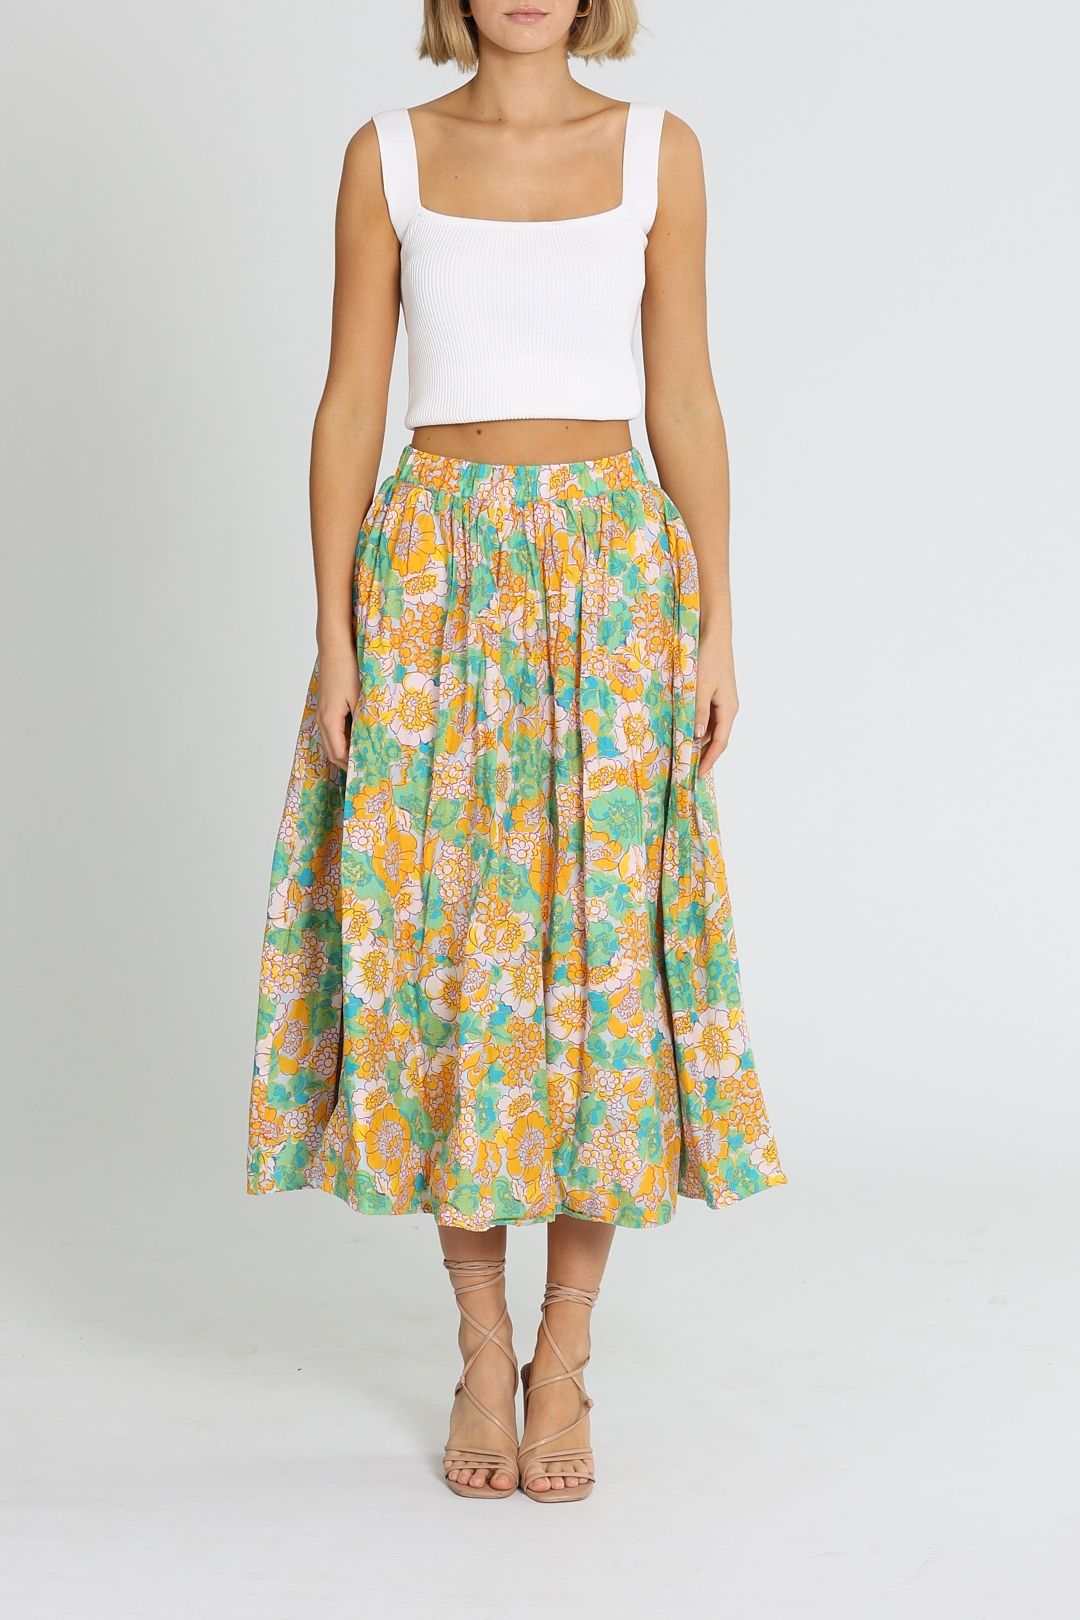 Bohemian Traders Circle Skirt With Wide Pocket Hem Multi Cotton Voile